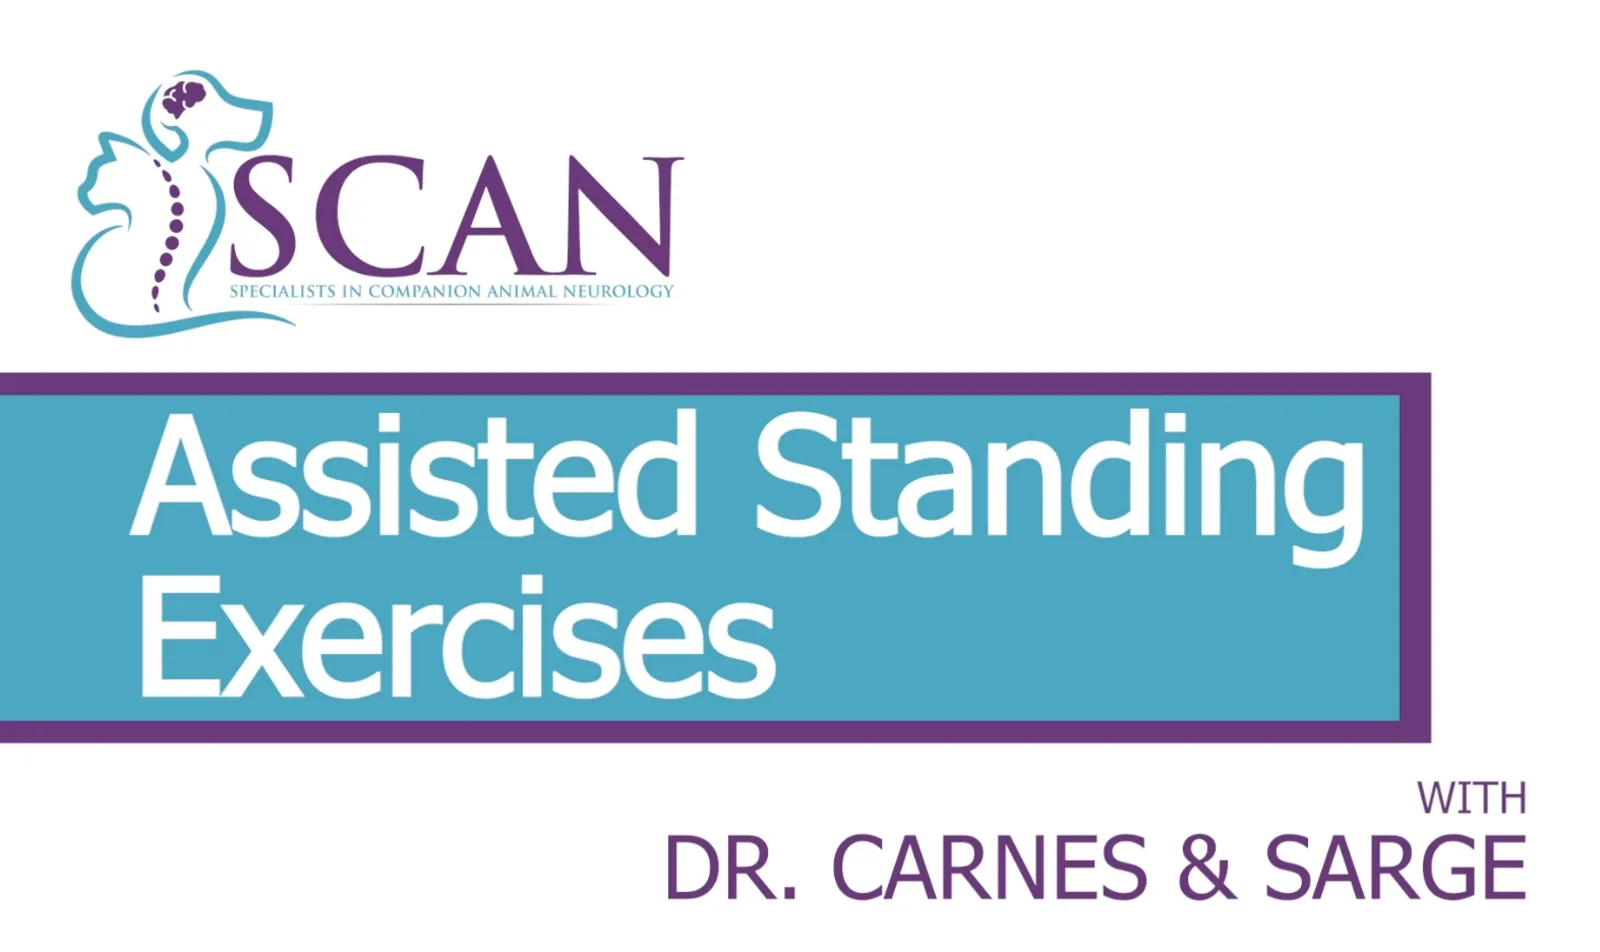 SCAN presents Assisted Standing Exercises with Dr. Carnes